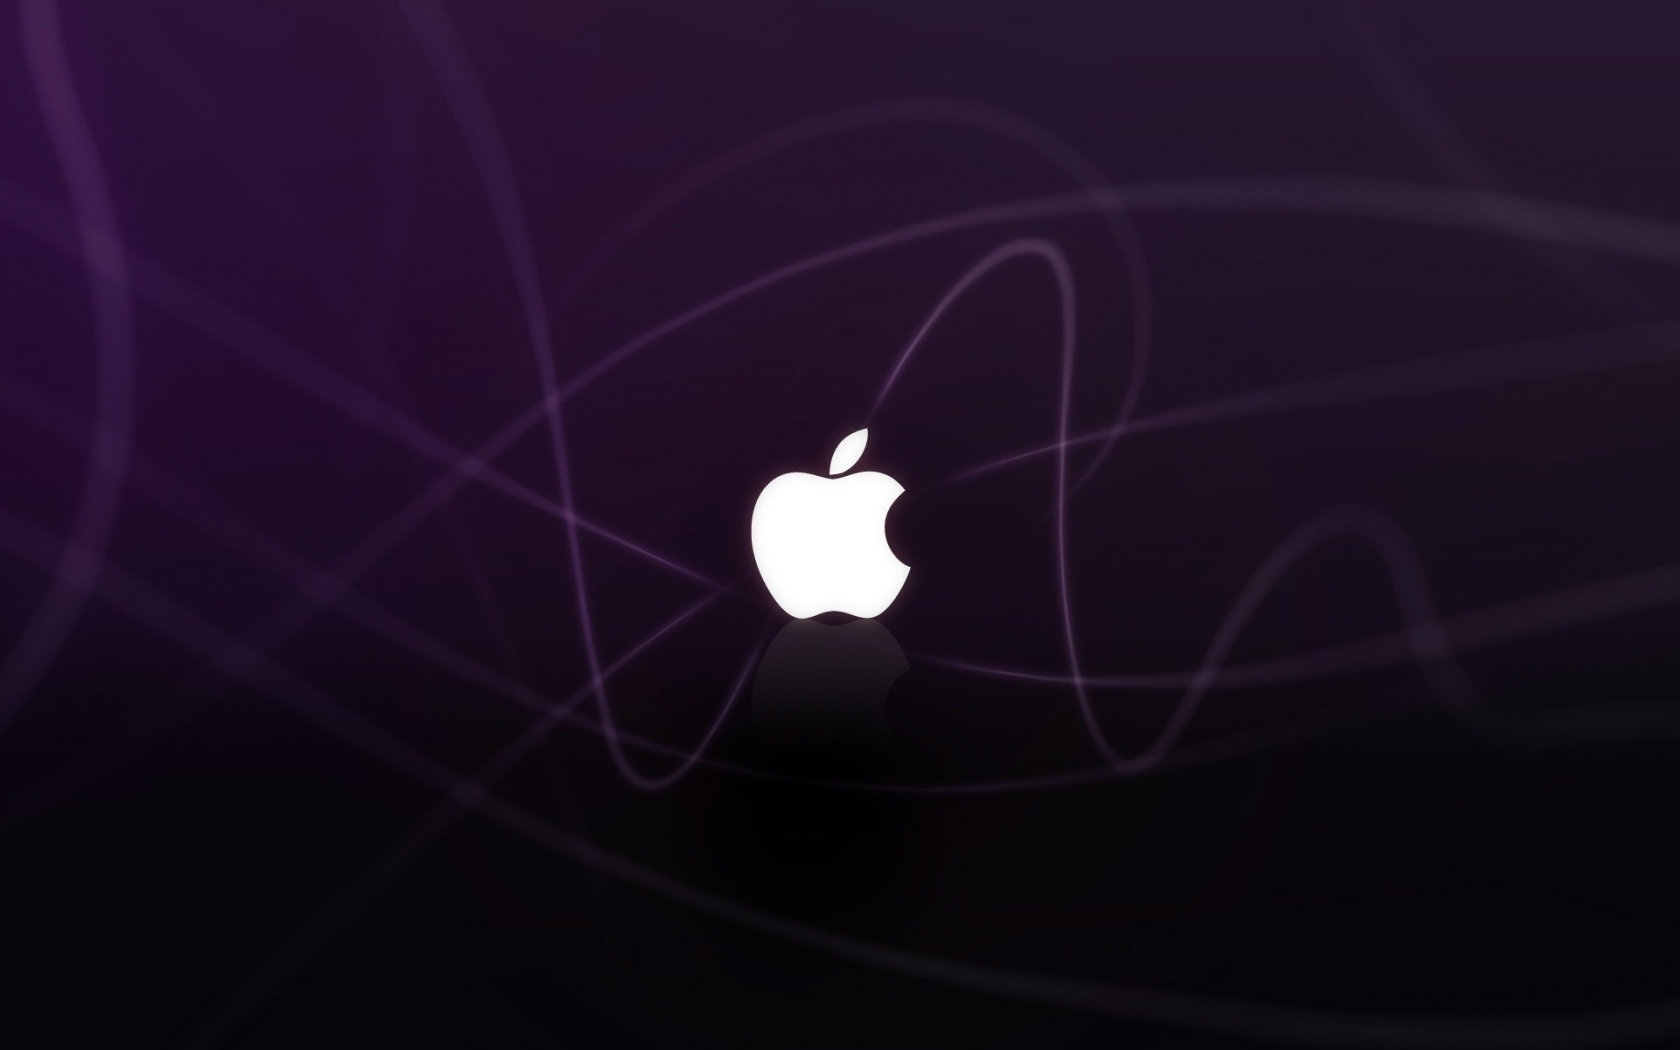 Purple Apple frequency for 1680 x 1050 widescreen resolution